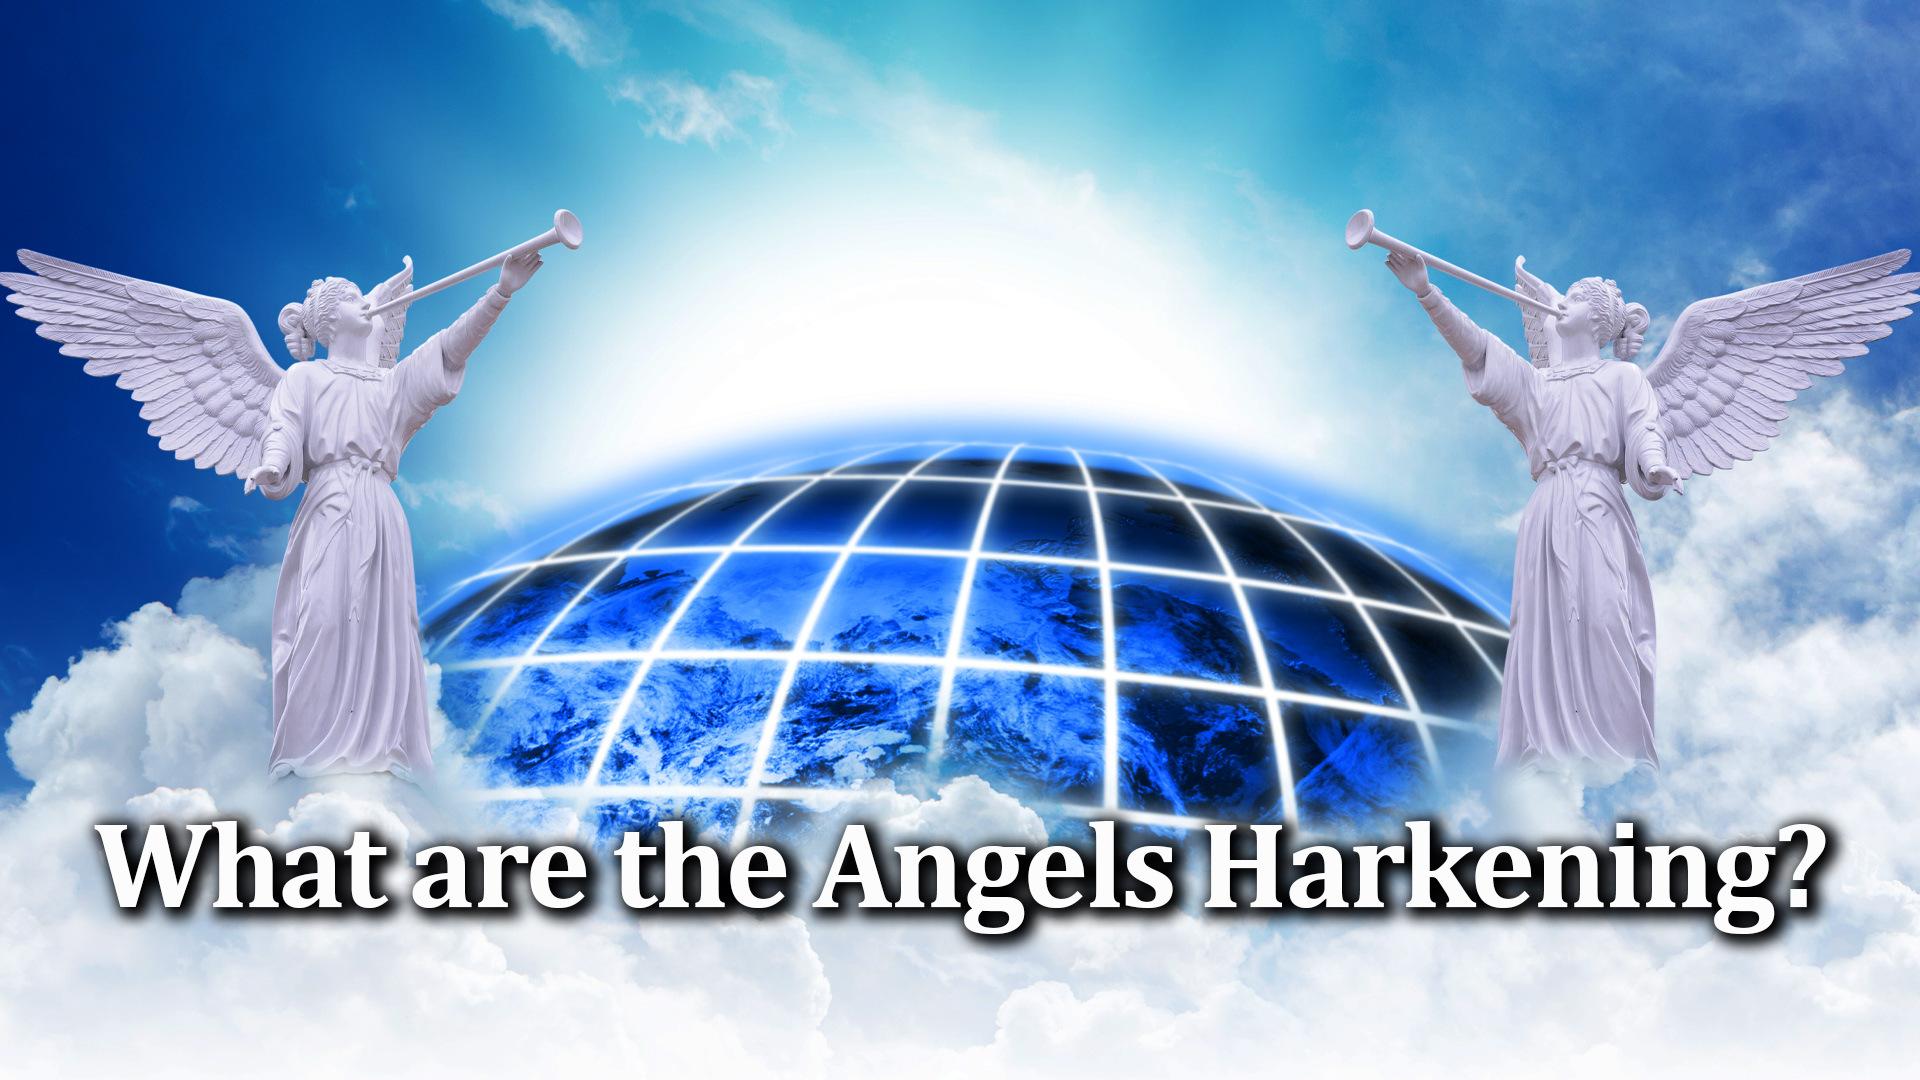 12-14-21 What are the Angels Harkening